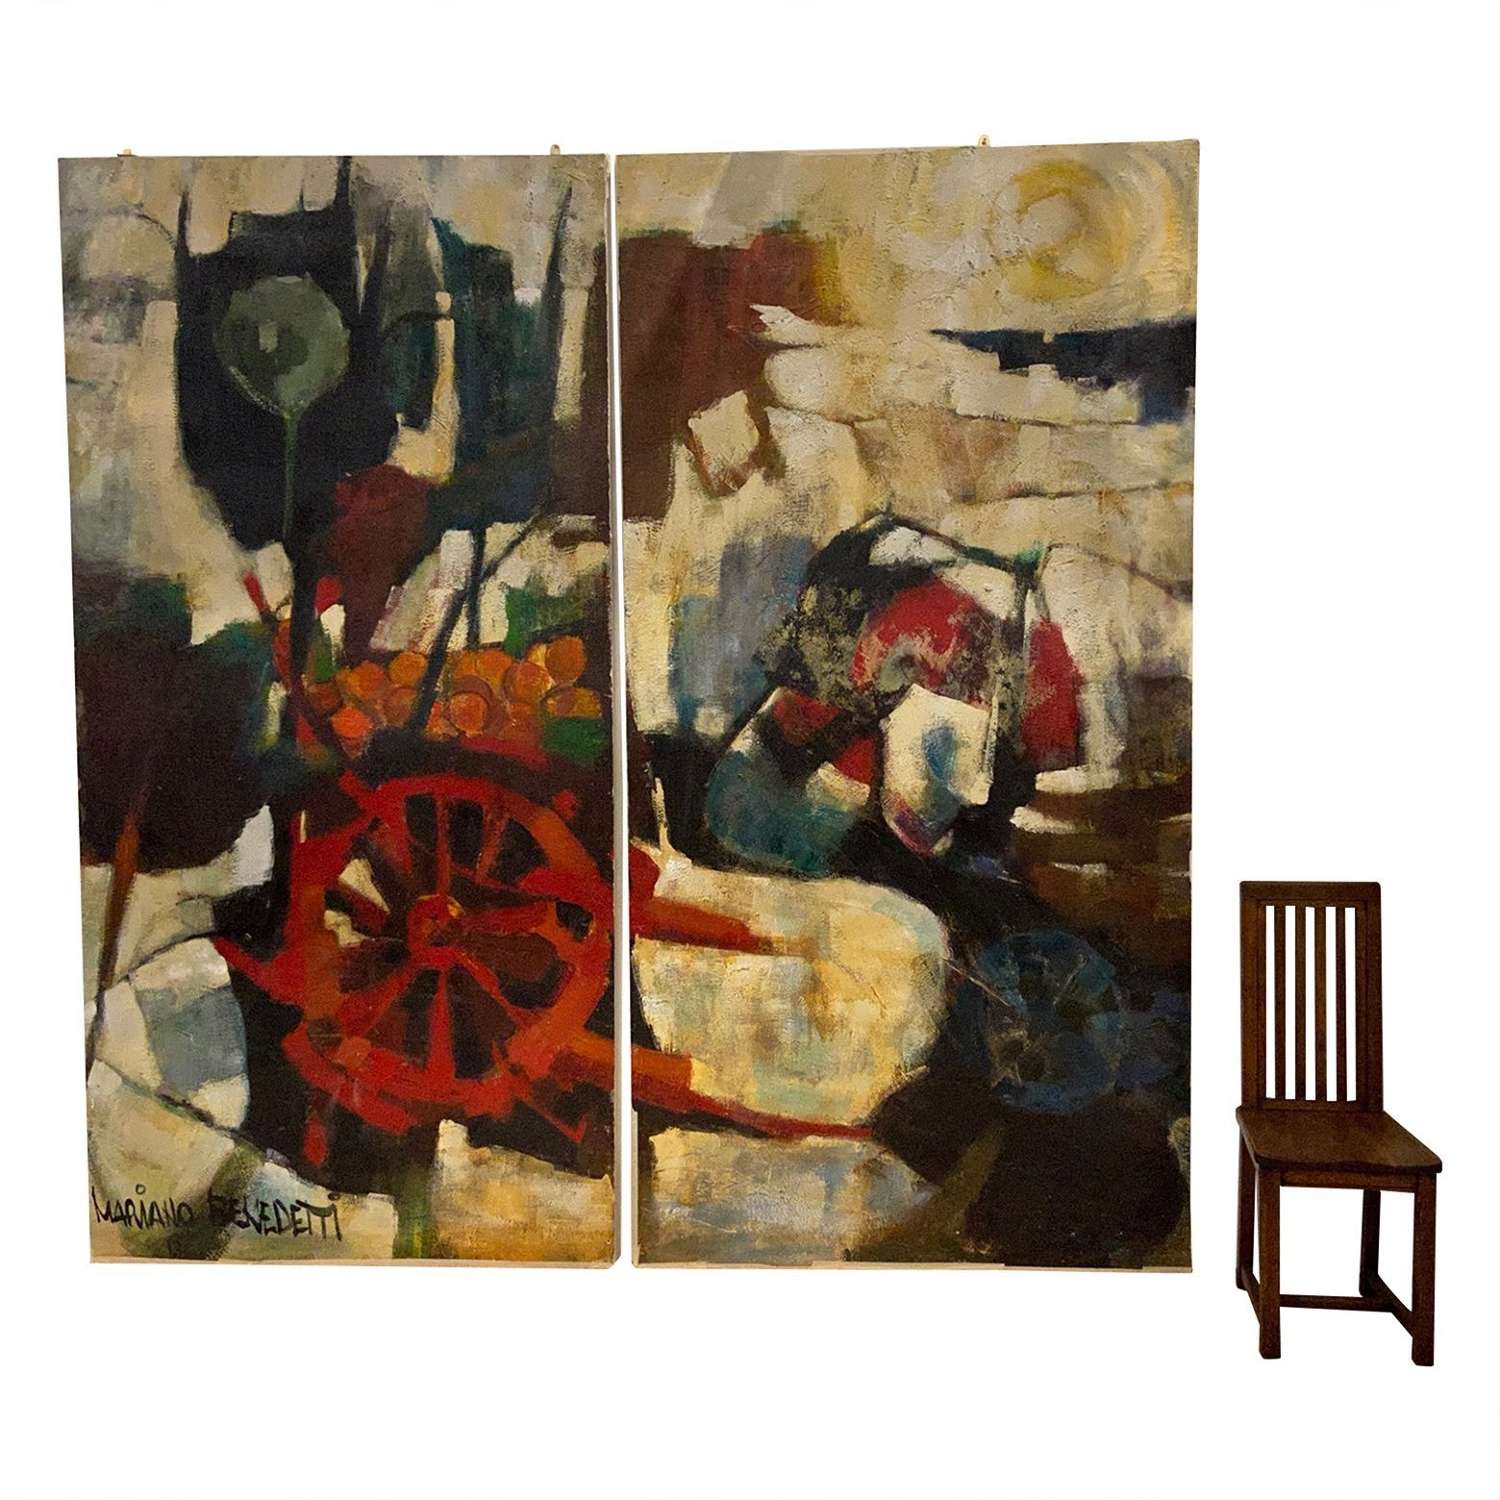 Large 1950's abstract oil diptych by Mariano Benedetti